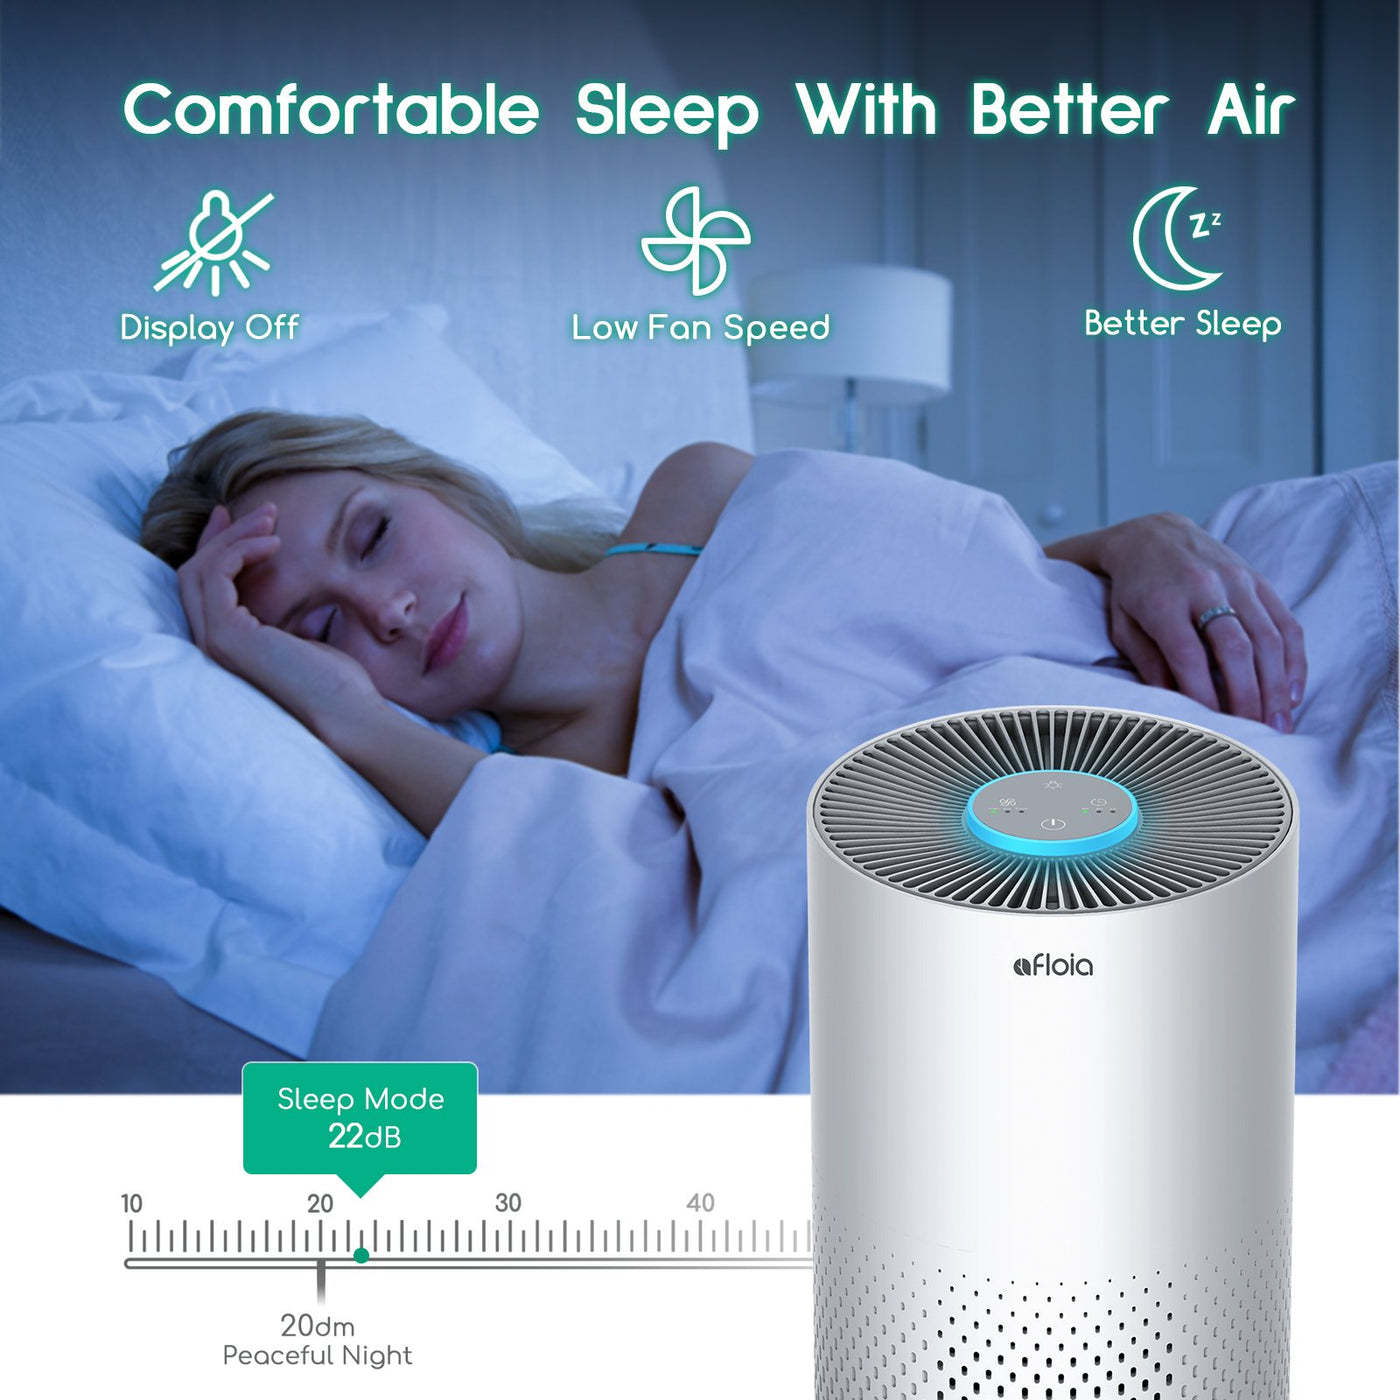  Afloia Air Purifier And Humidifier Combo For Home, 22Db 7  Colors Night Air Purifiers 2 In 1 With Remote Control, Quiet Air Cleaner  Removing 99.99% Smokers Odor And Pollen For Bedroom 